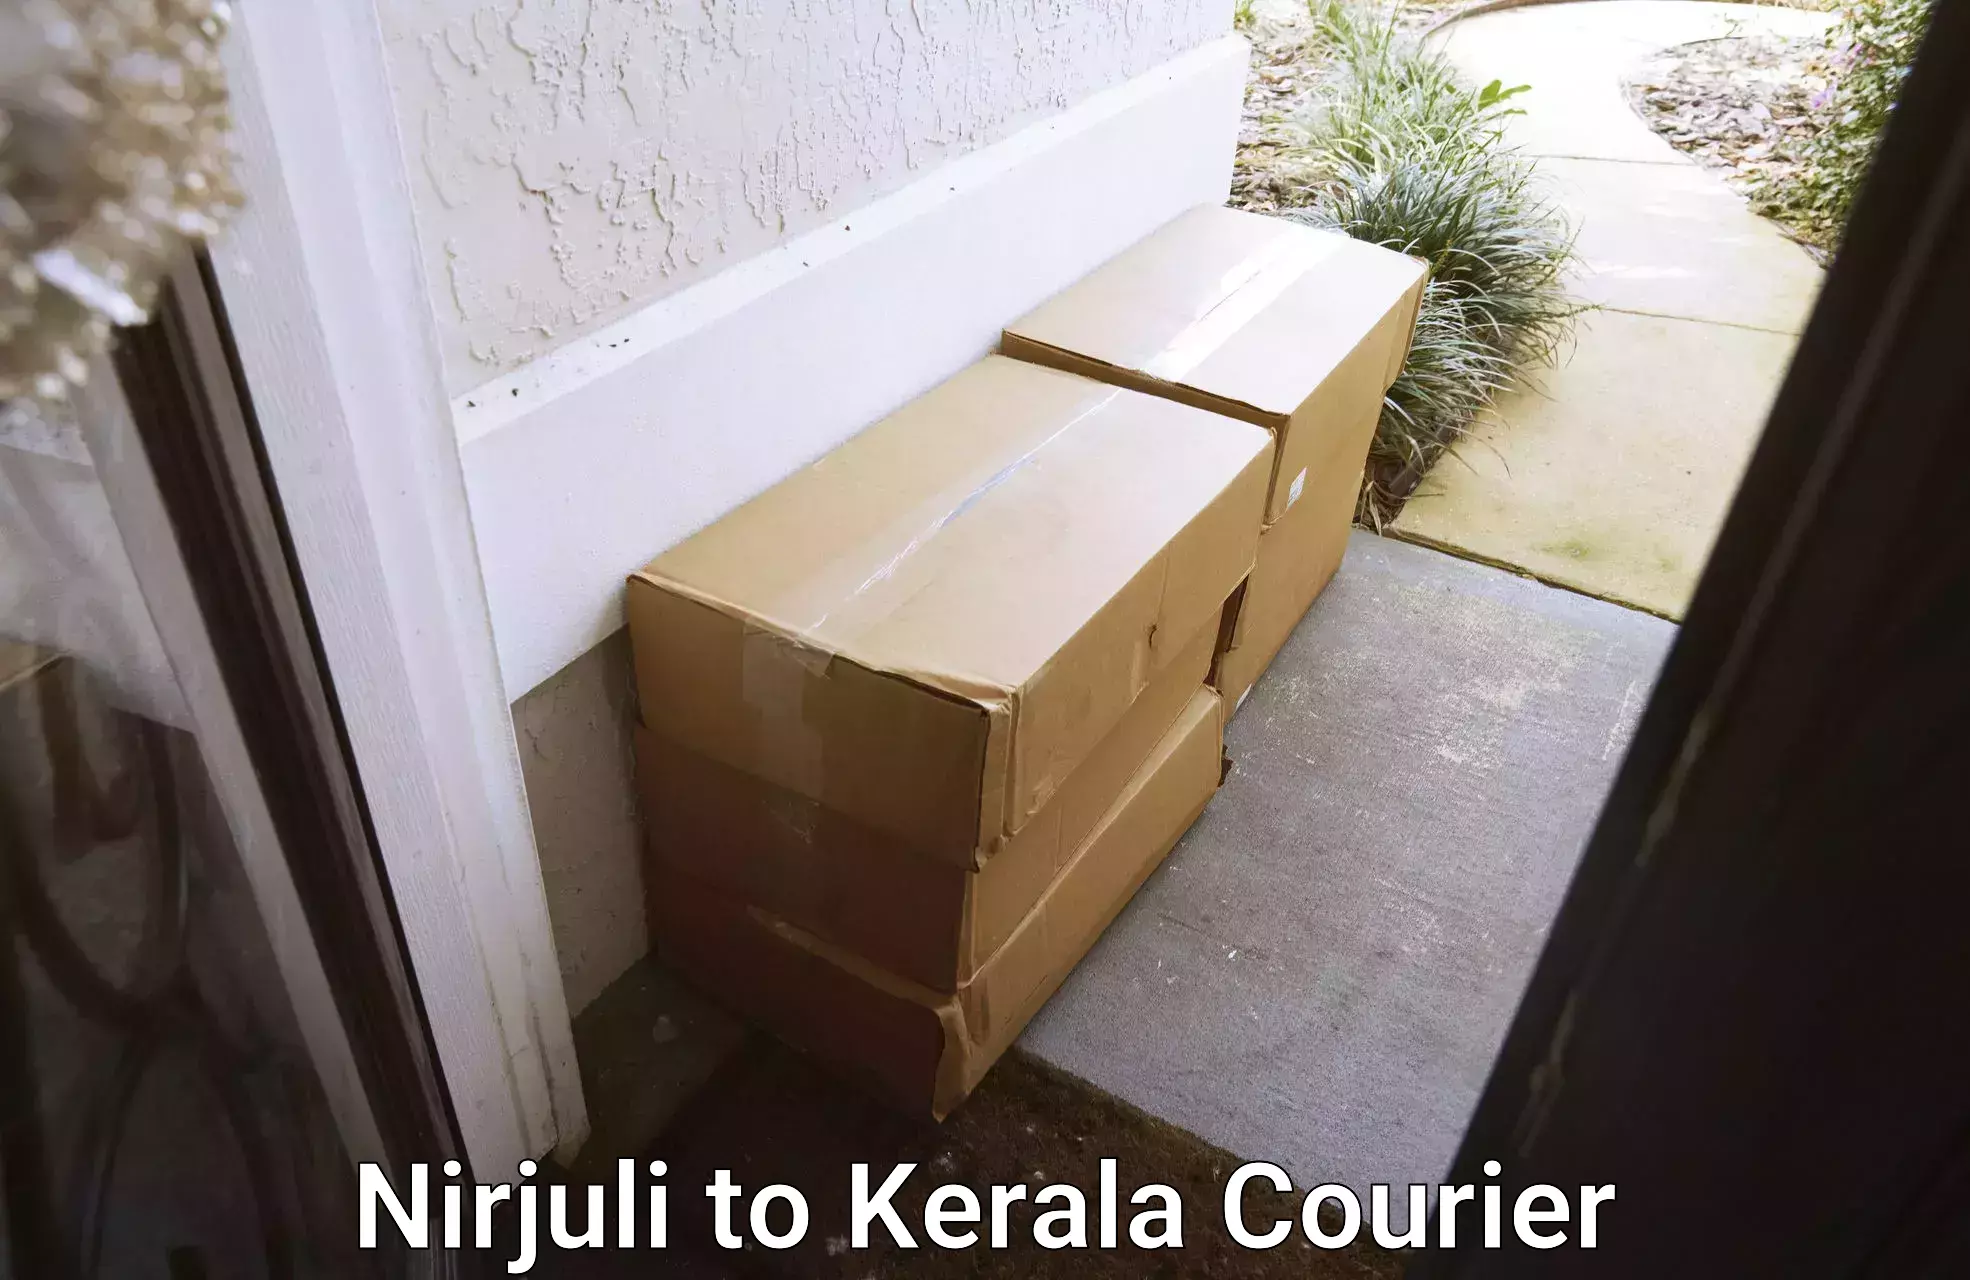 Flexible delivery schedules Nirjuli to Kerala